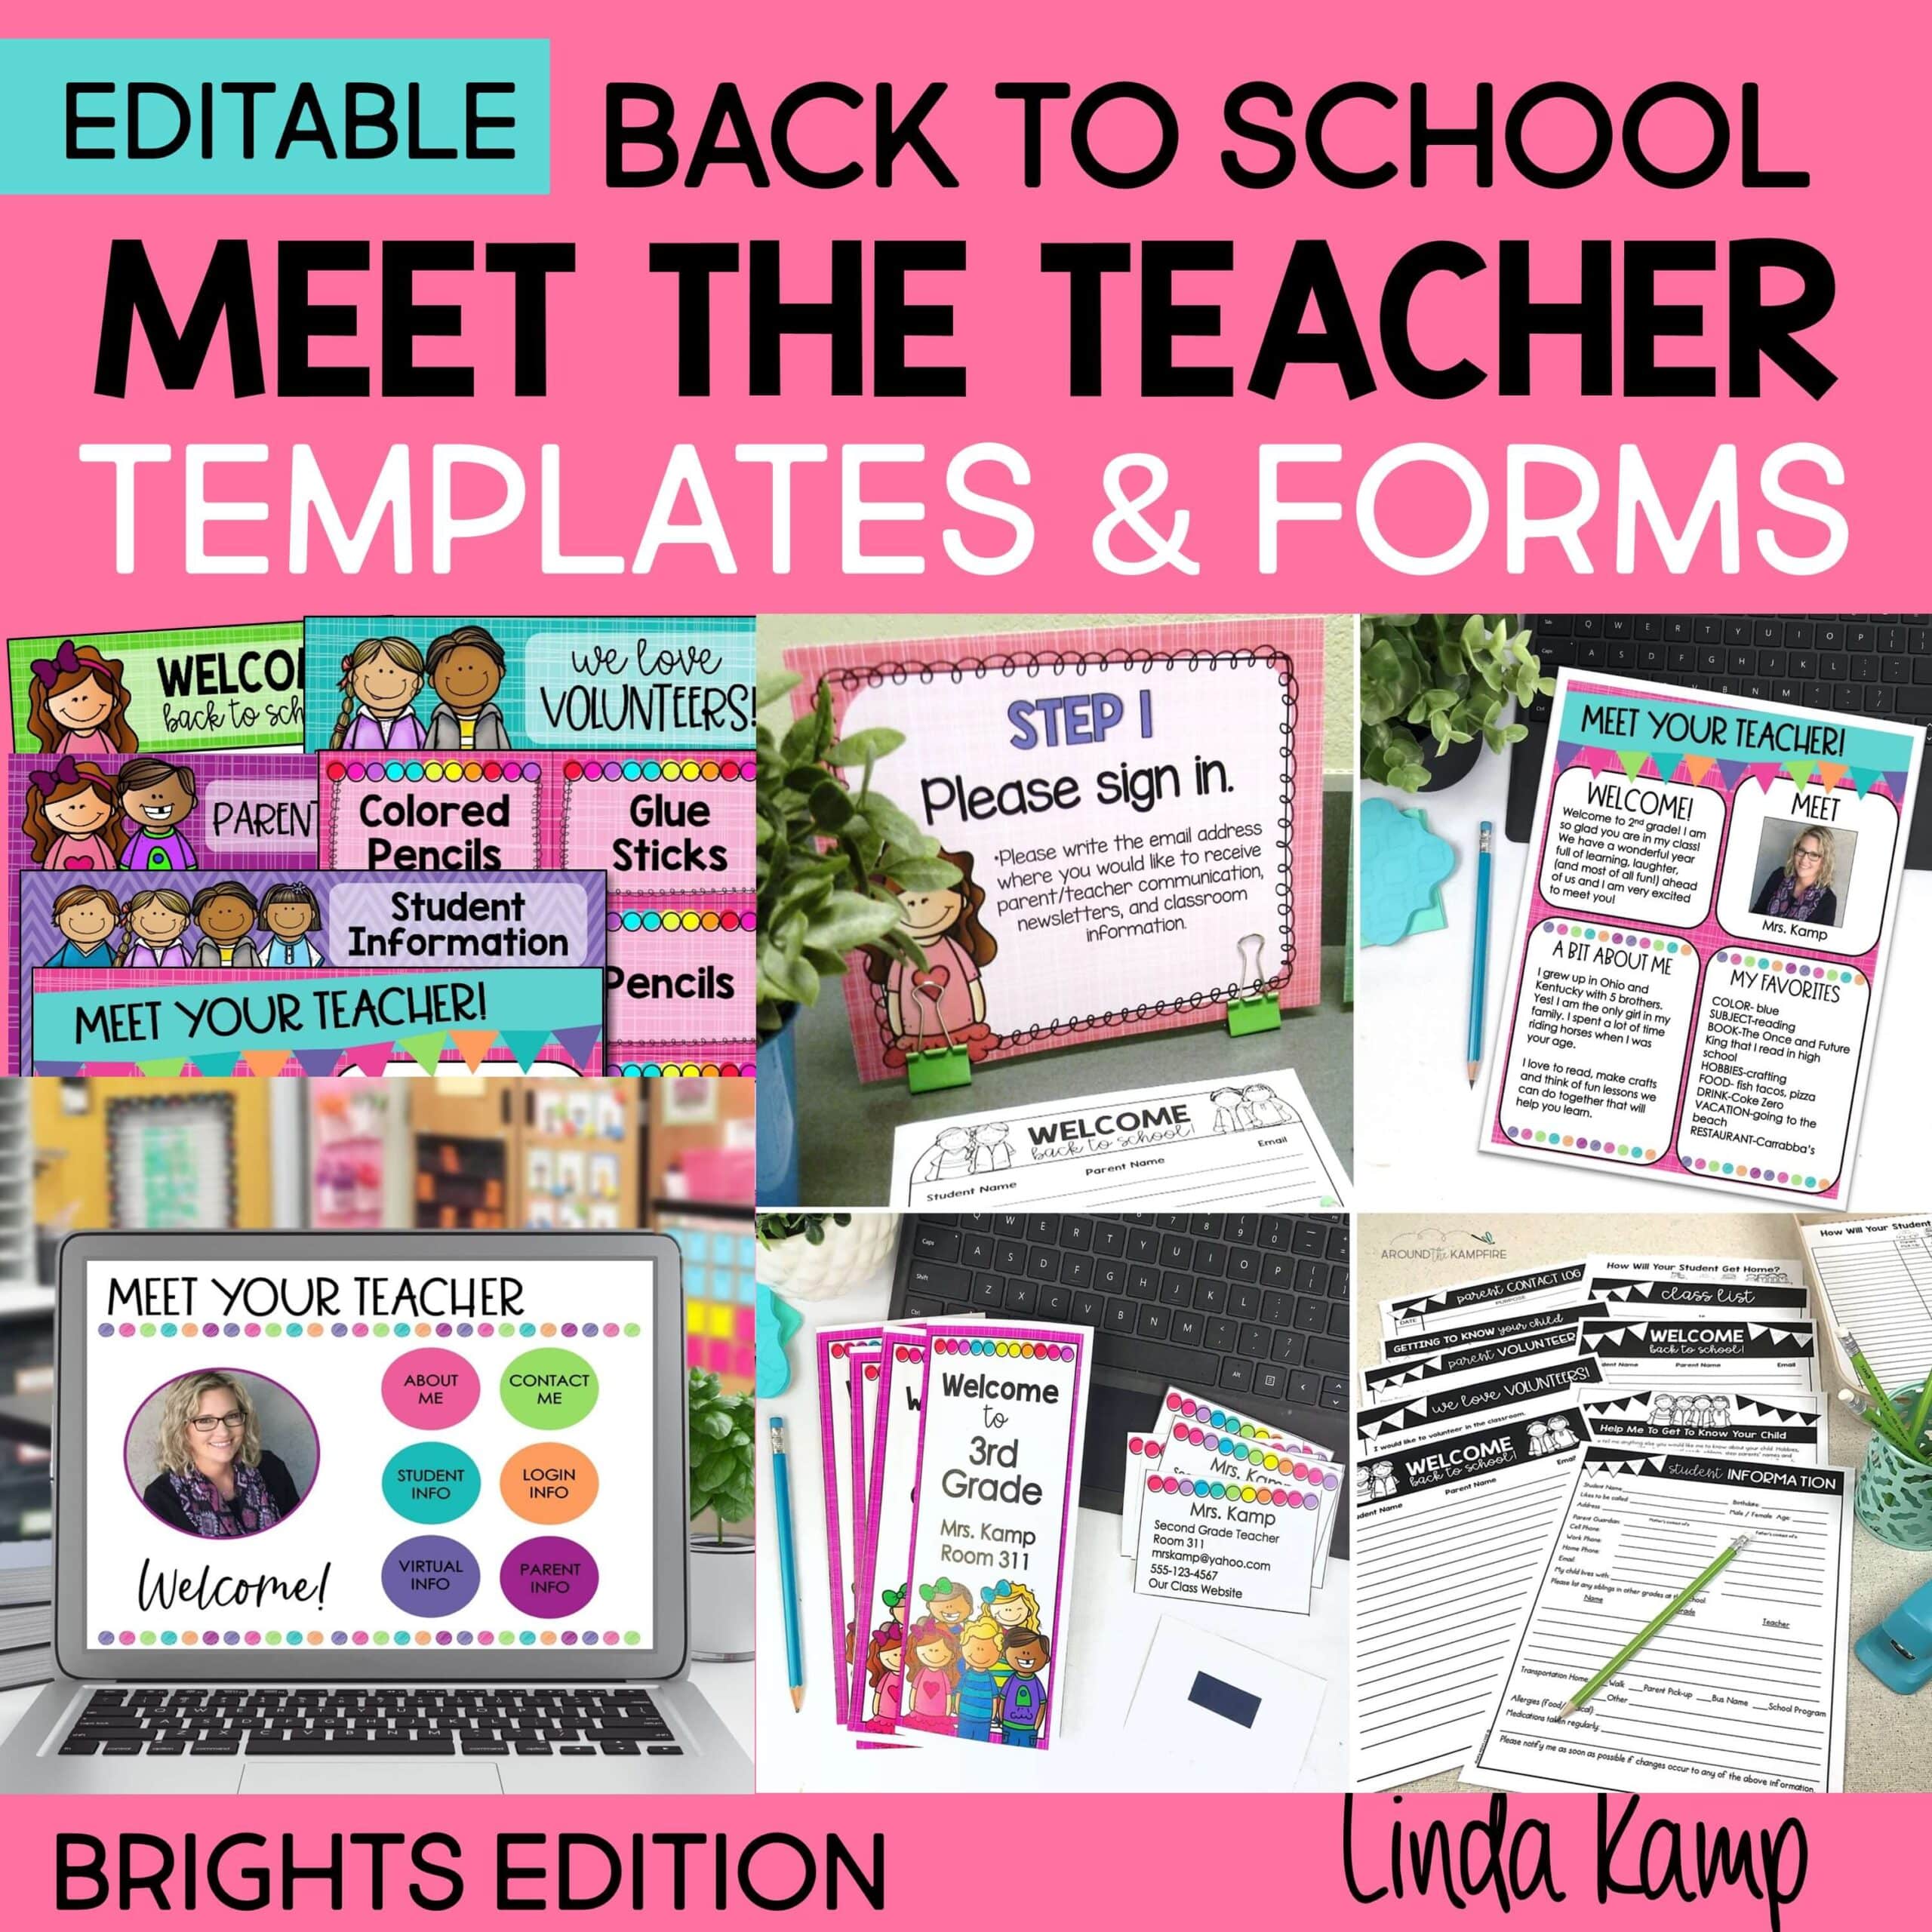 Meet the teacher bright templates and resources.